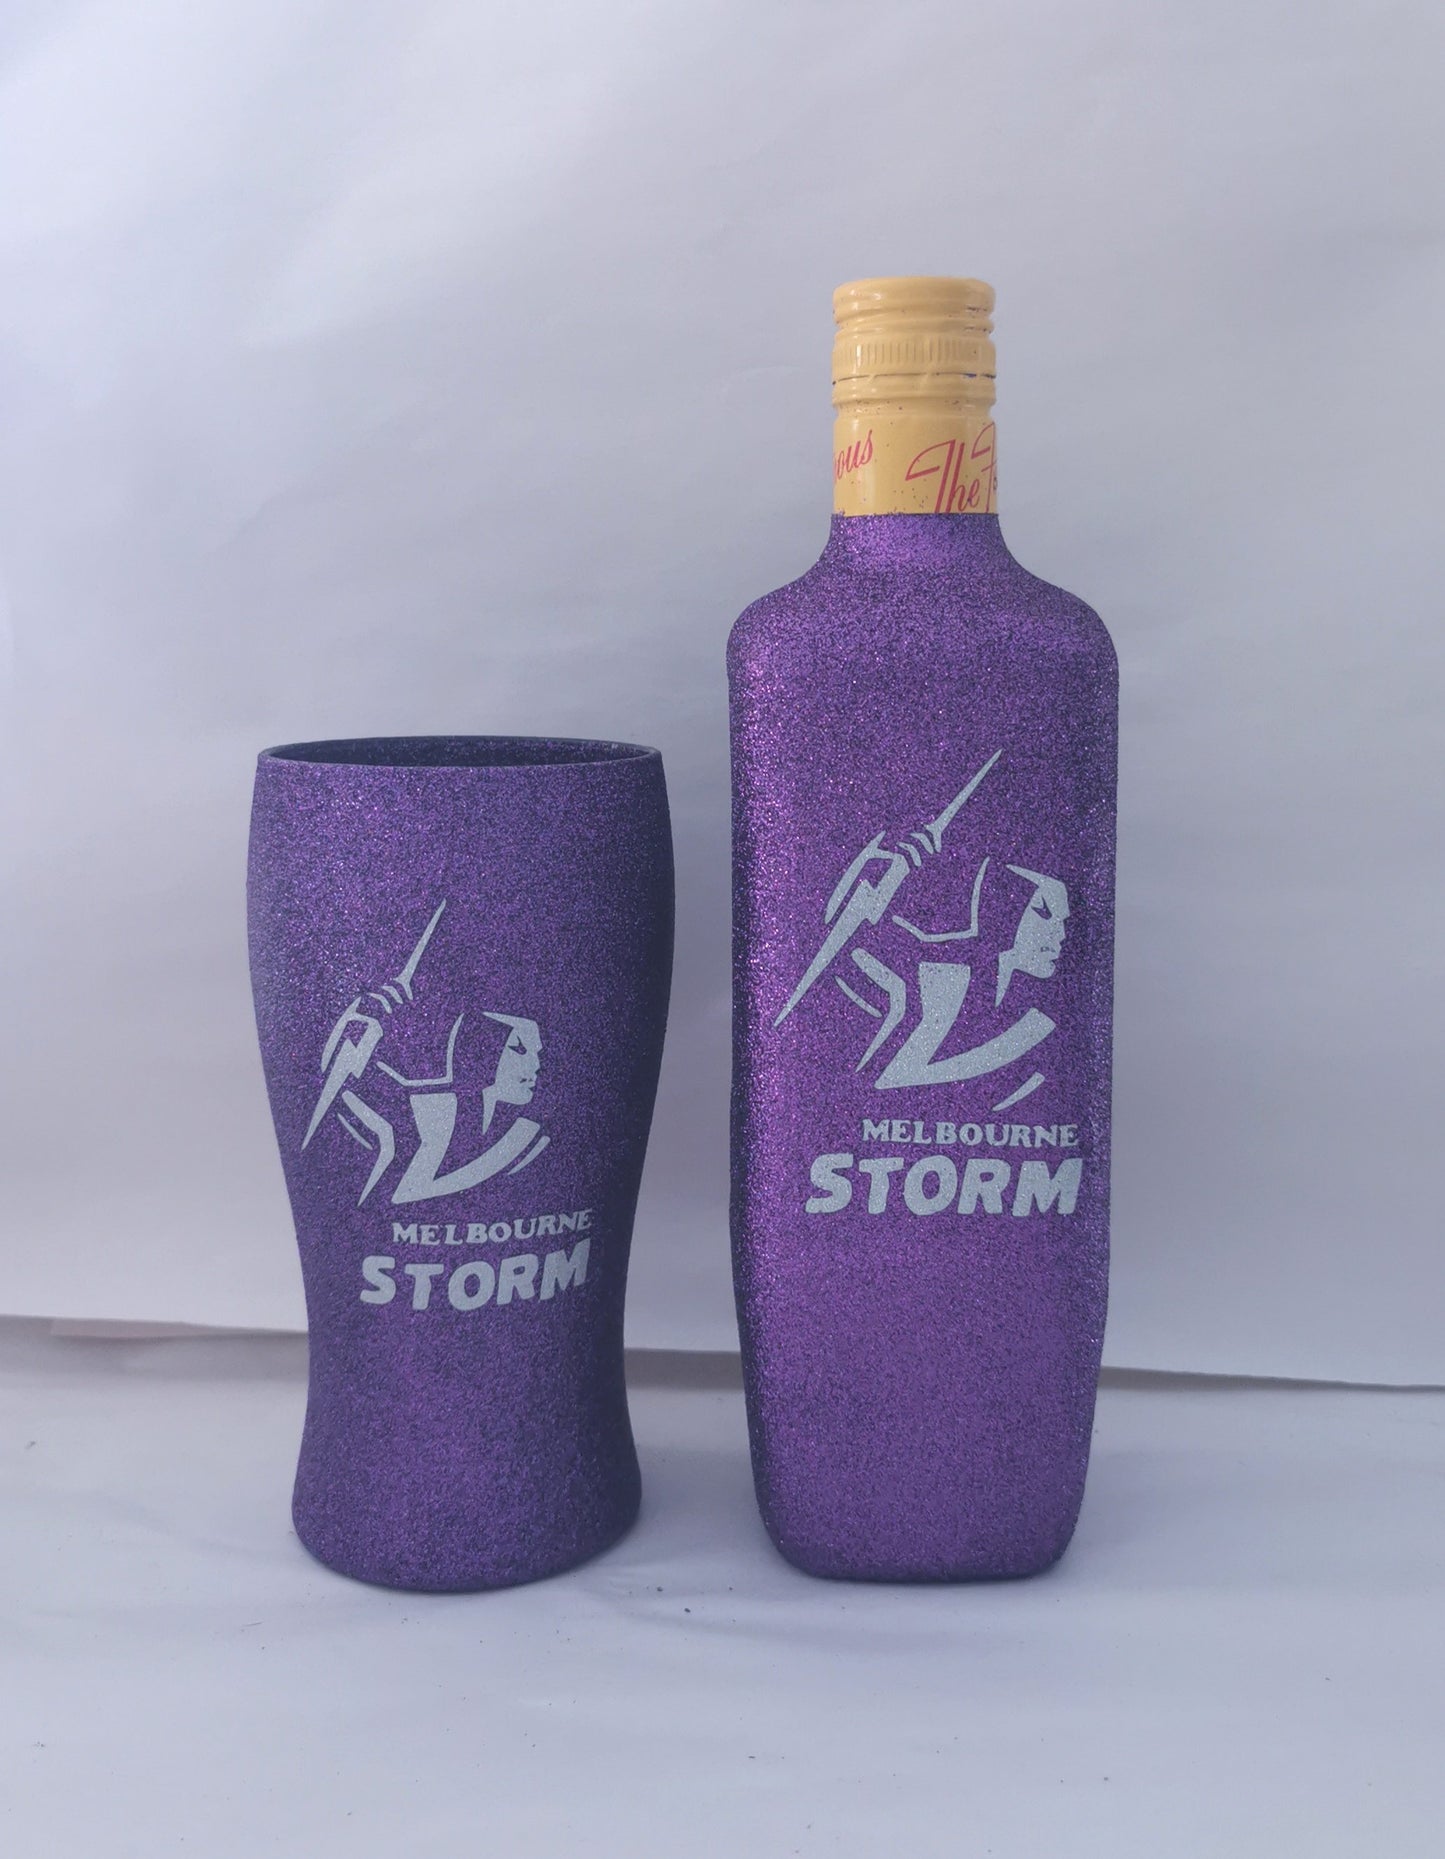 Melbourne Storm Alcohol set - Available in diff Alcohols